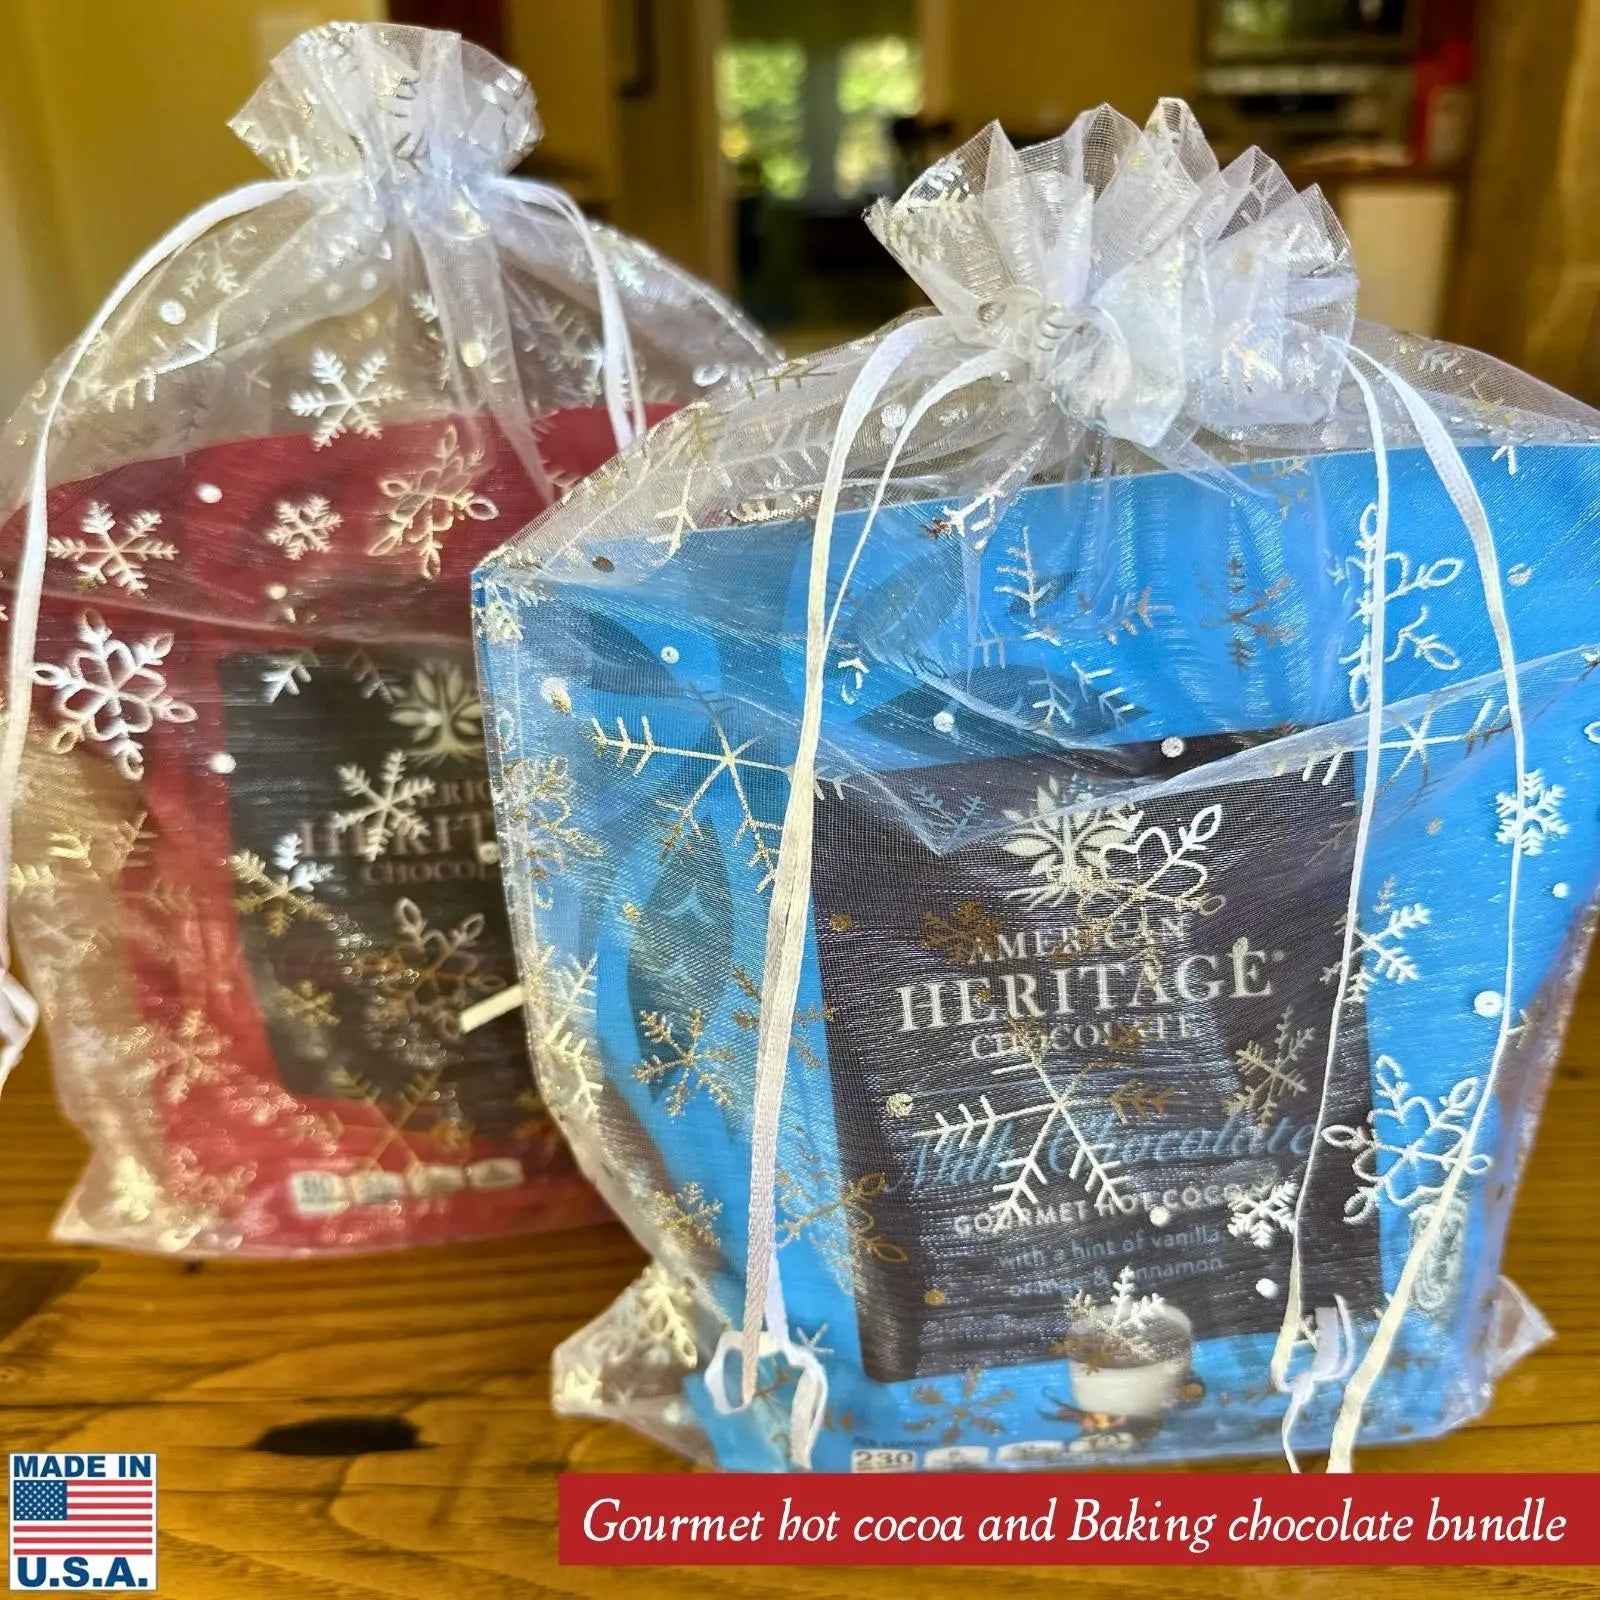 Bundle of Heritage Gourmet Hot Cocoa and Heritage Finely Grated Baking Chocolate for History Lovers from The History List store